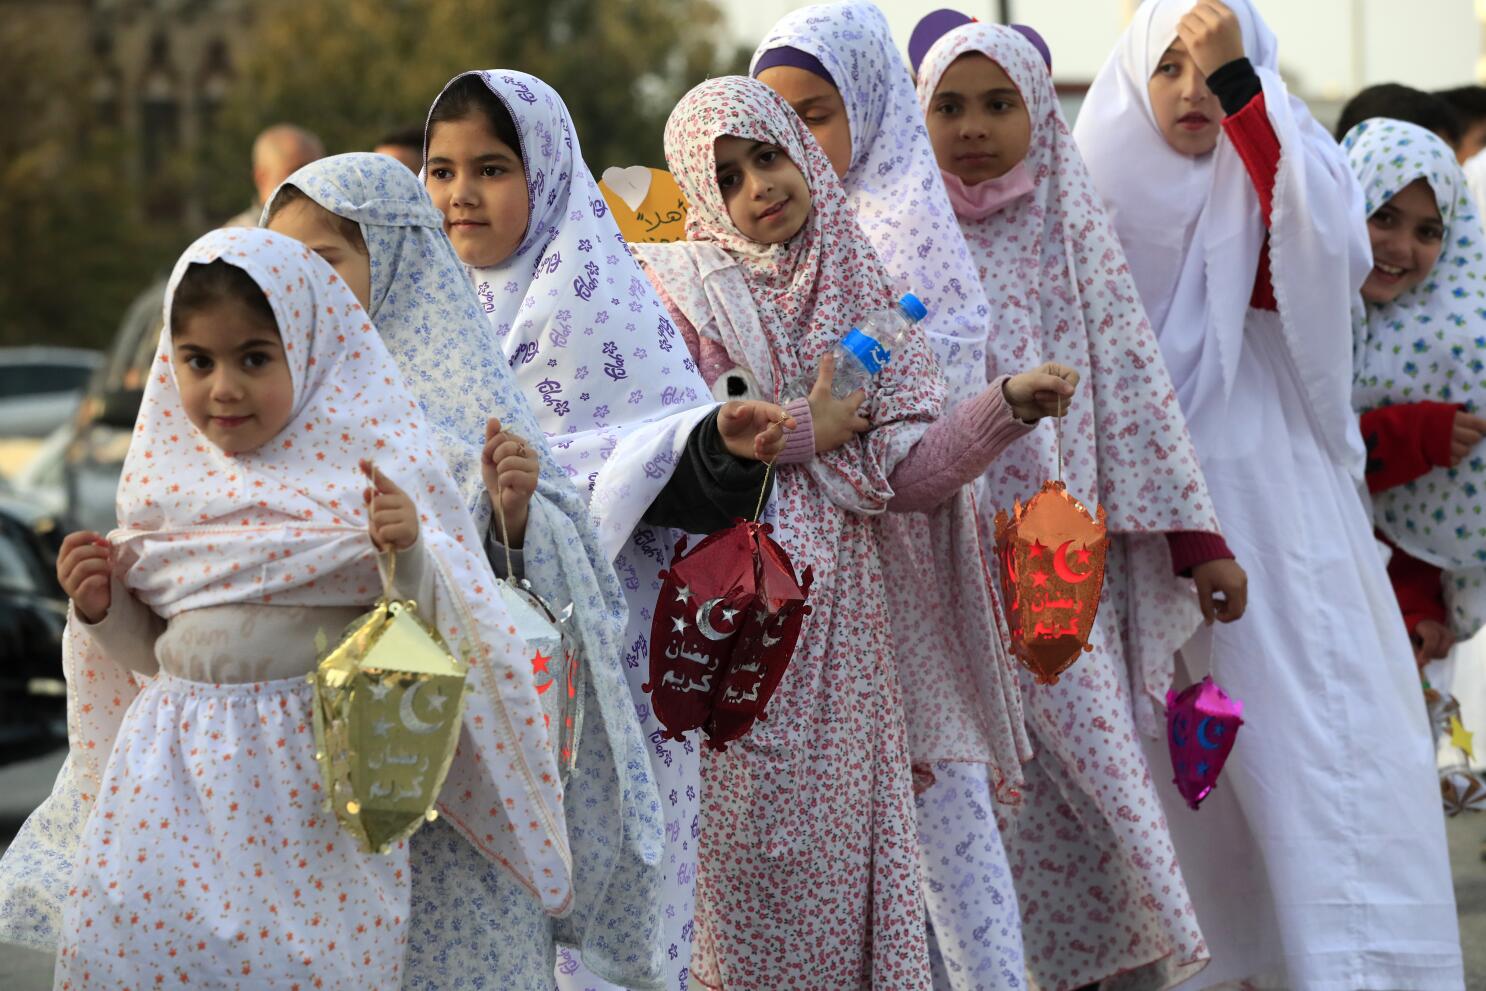 Eid clothes becoming 'unaffordable ritual', say parents